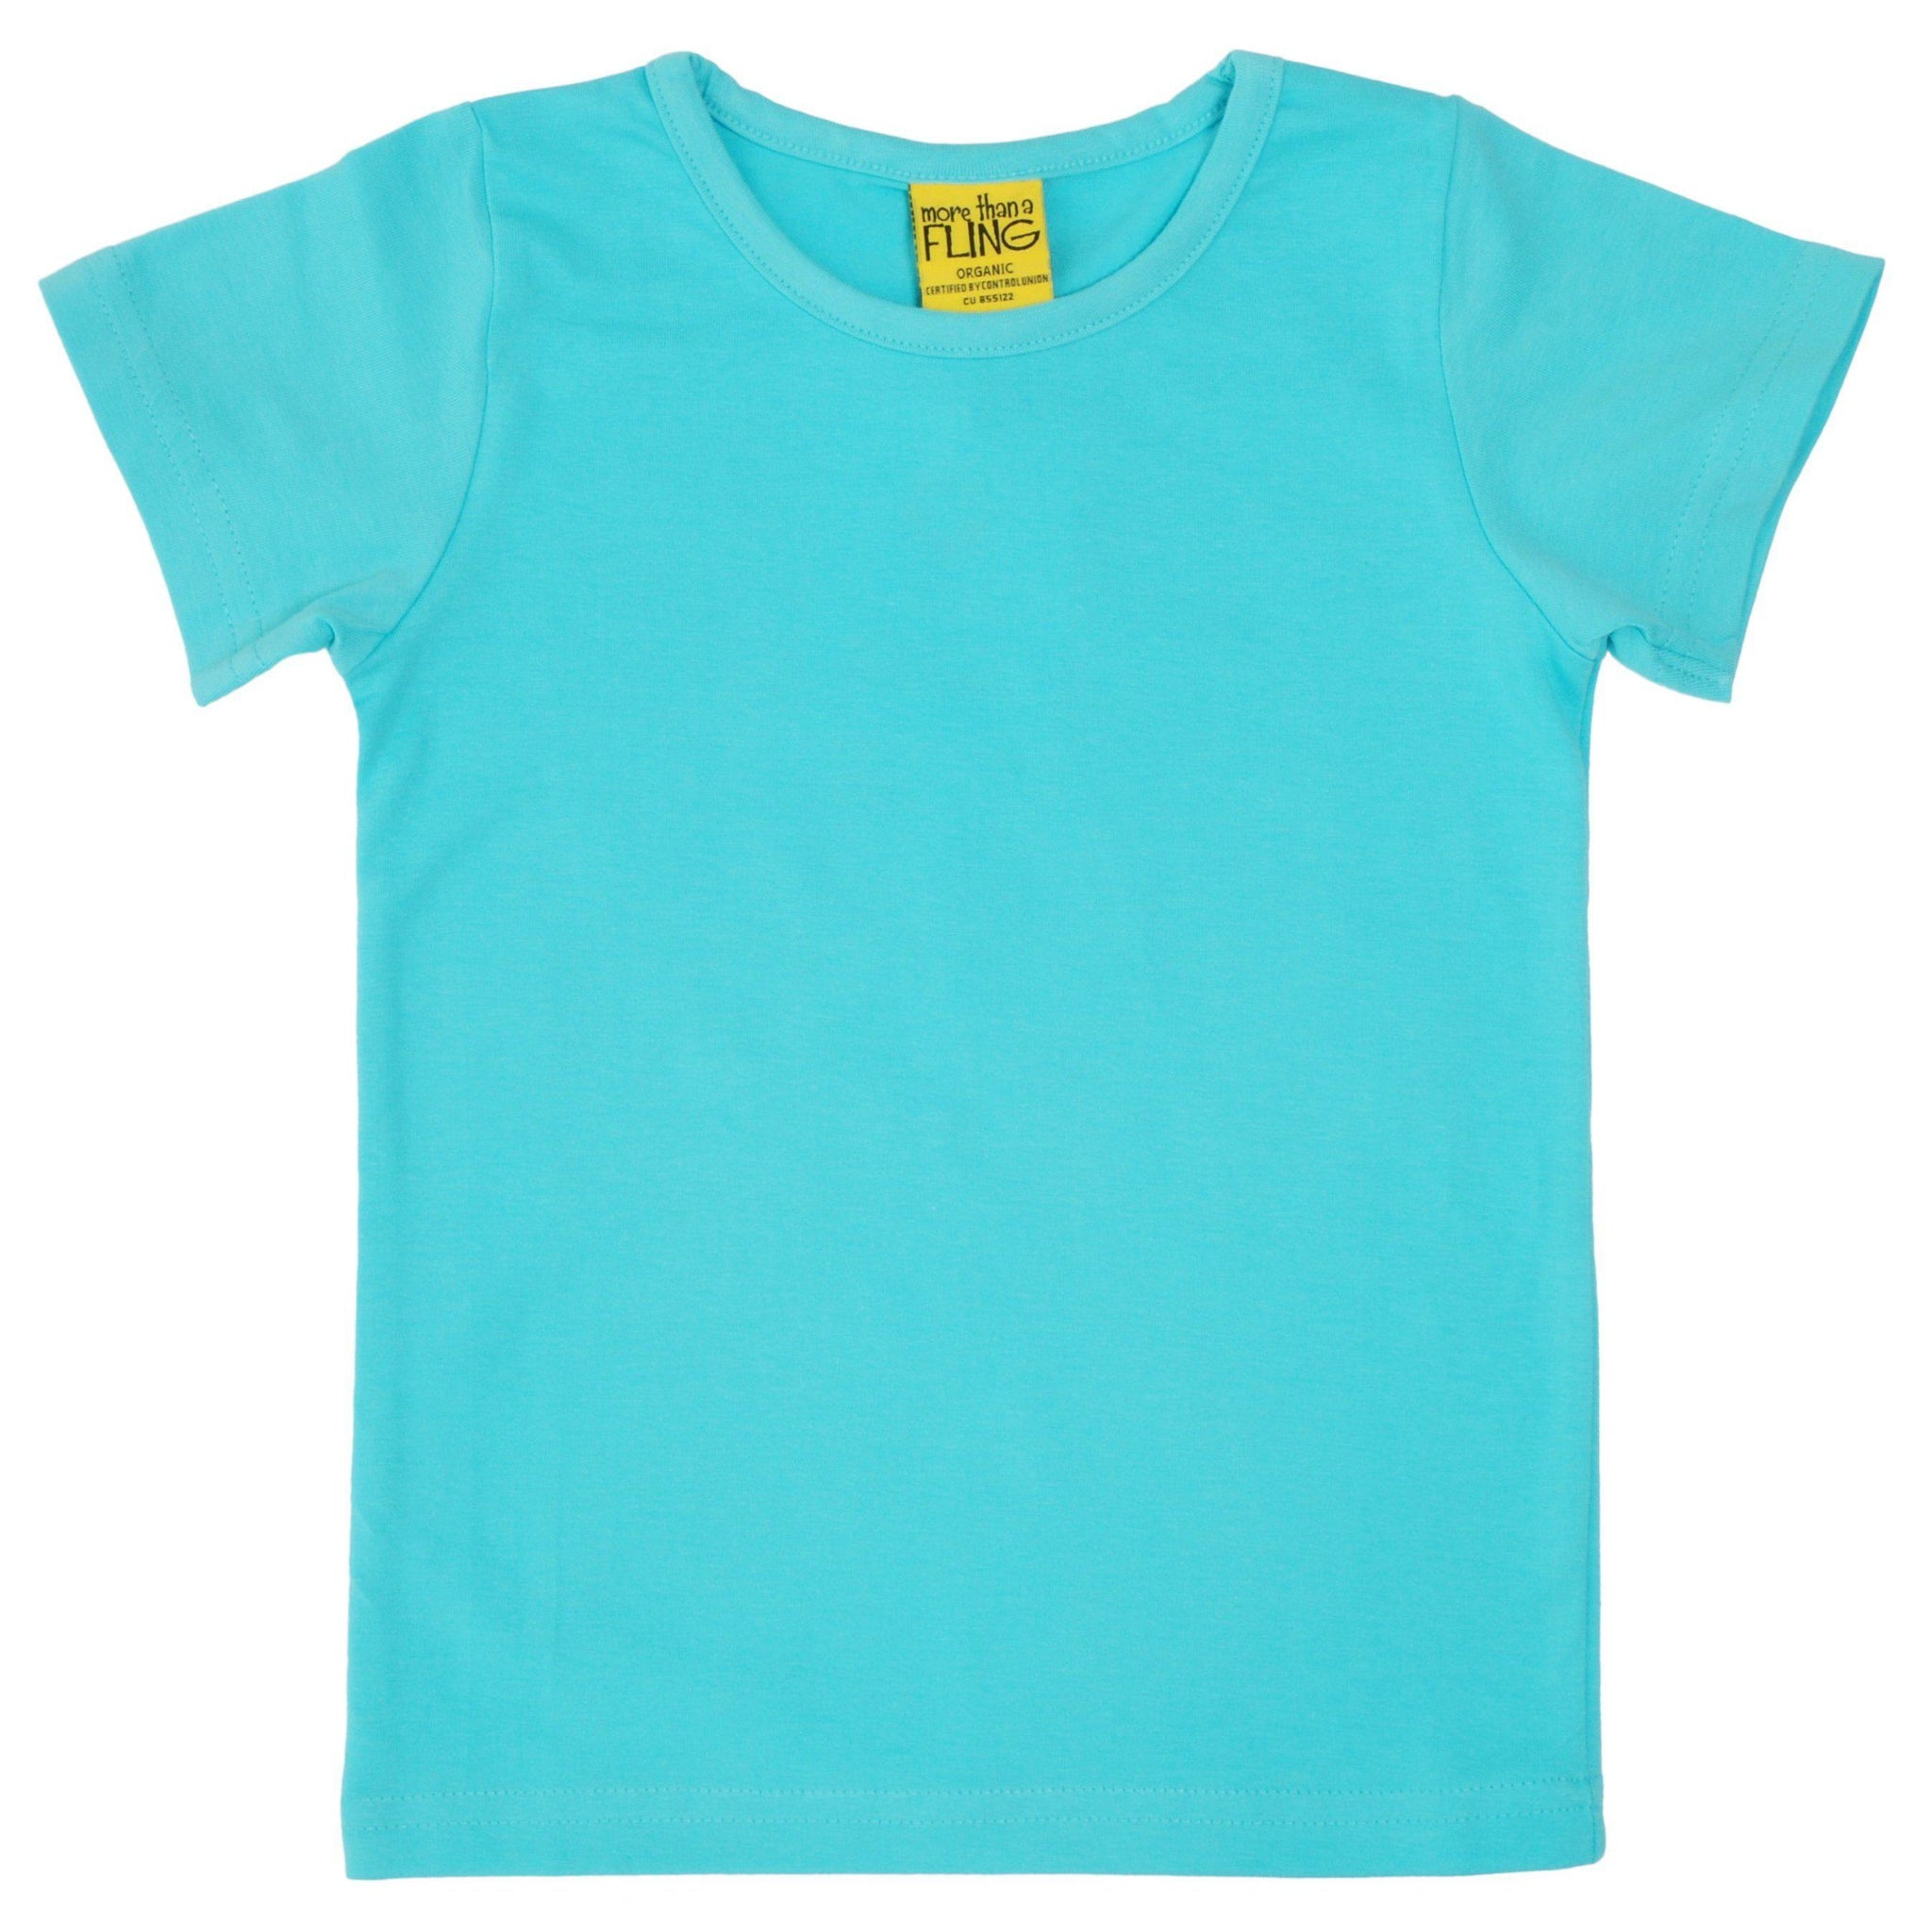 More than a Fling - Turquoise Short Sleeved Top (1-2 Years)